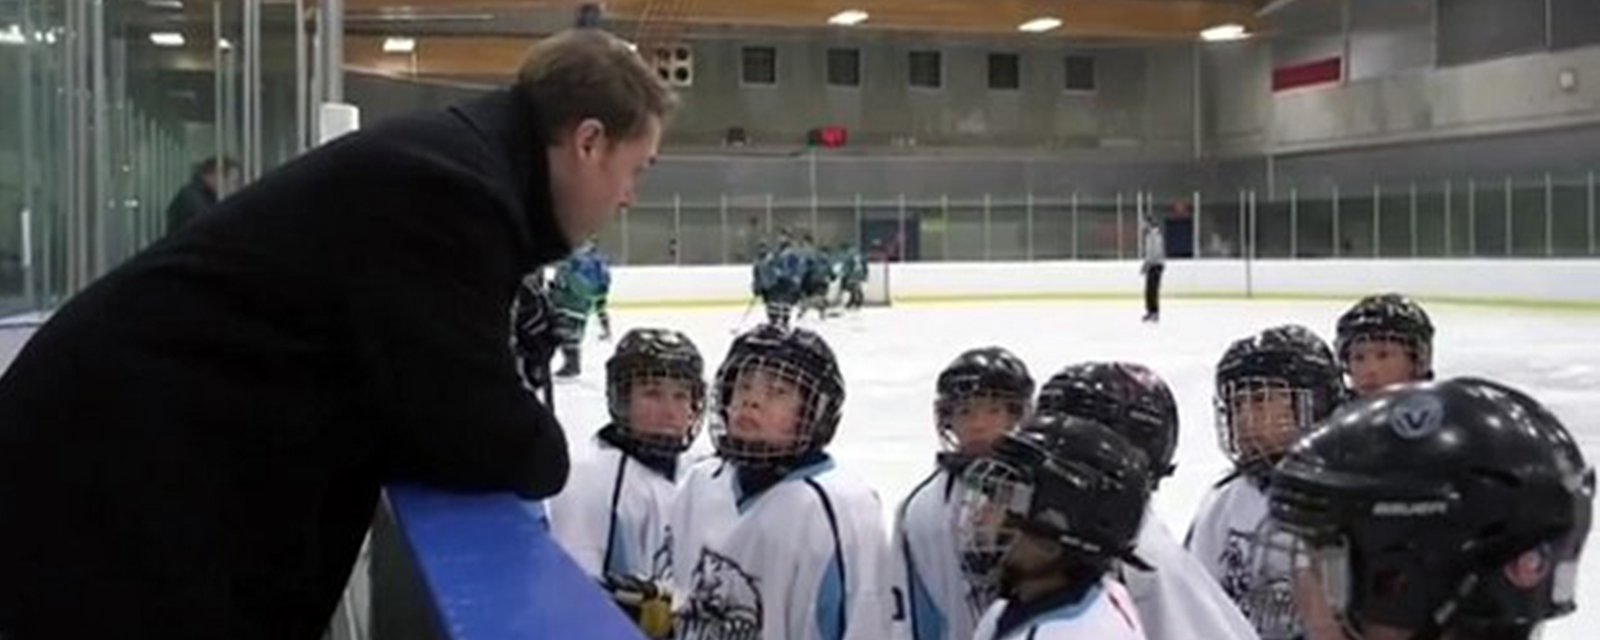 PeeWee team goes viral in their search for a kidney donor for their coach